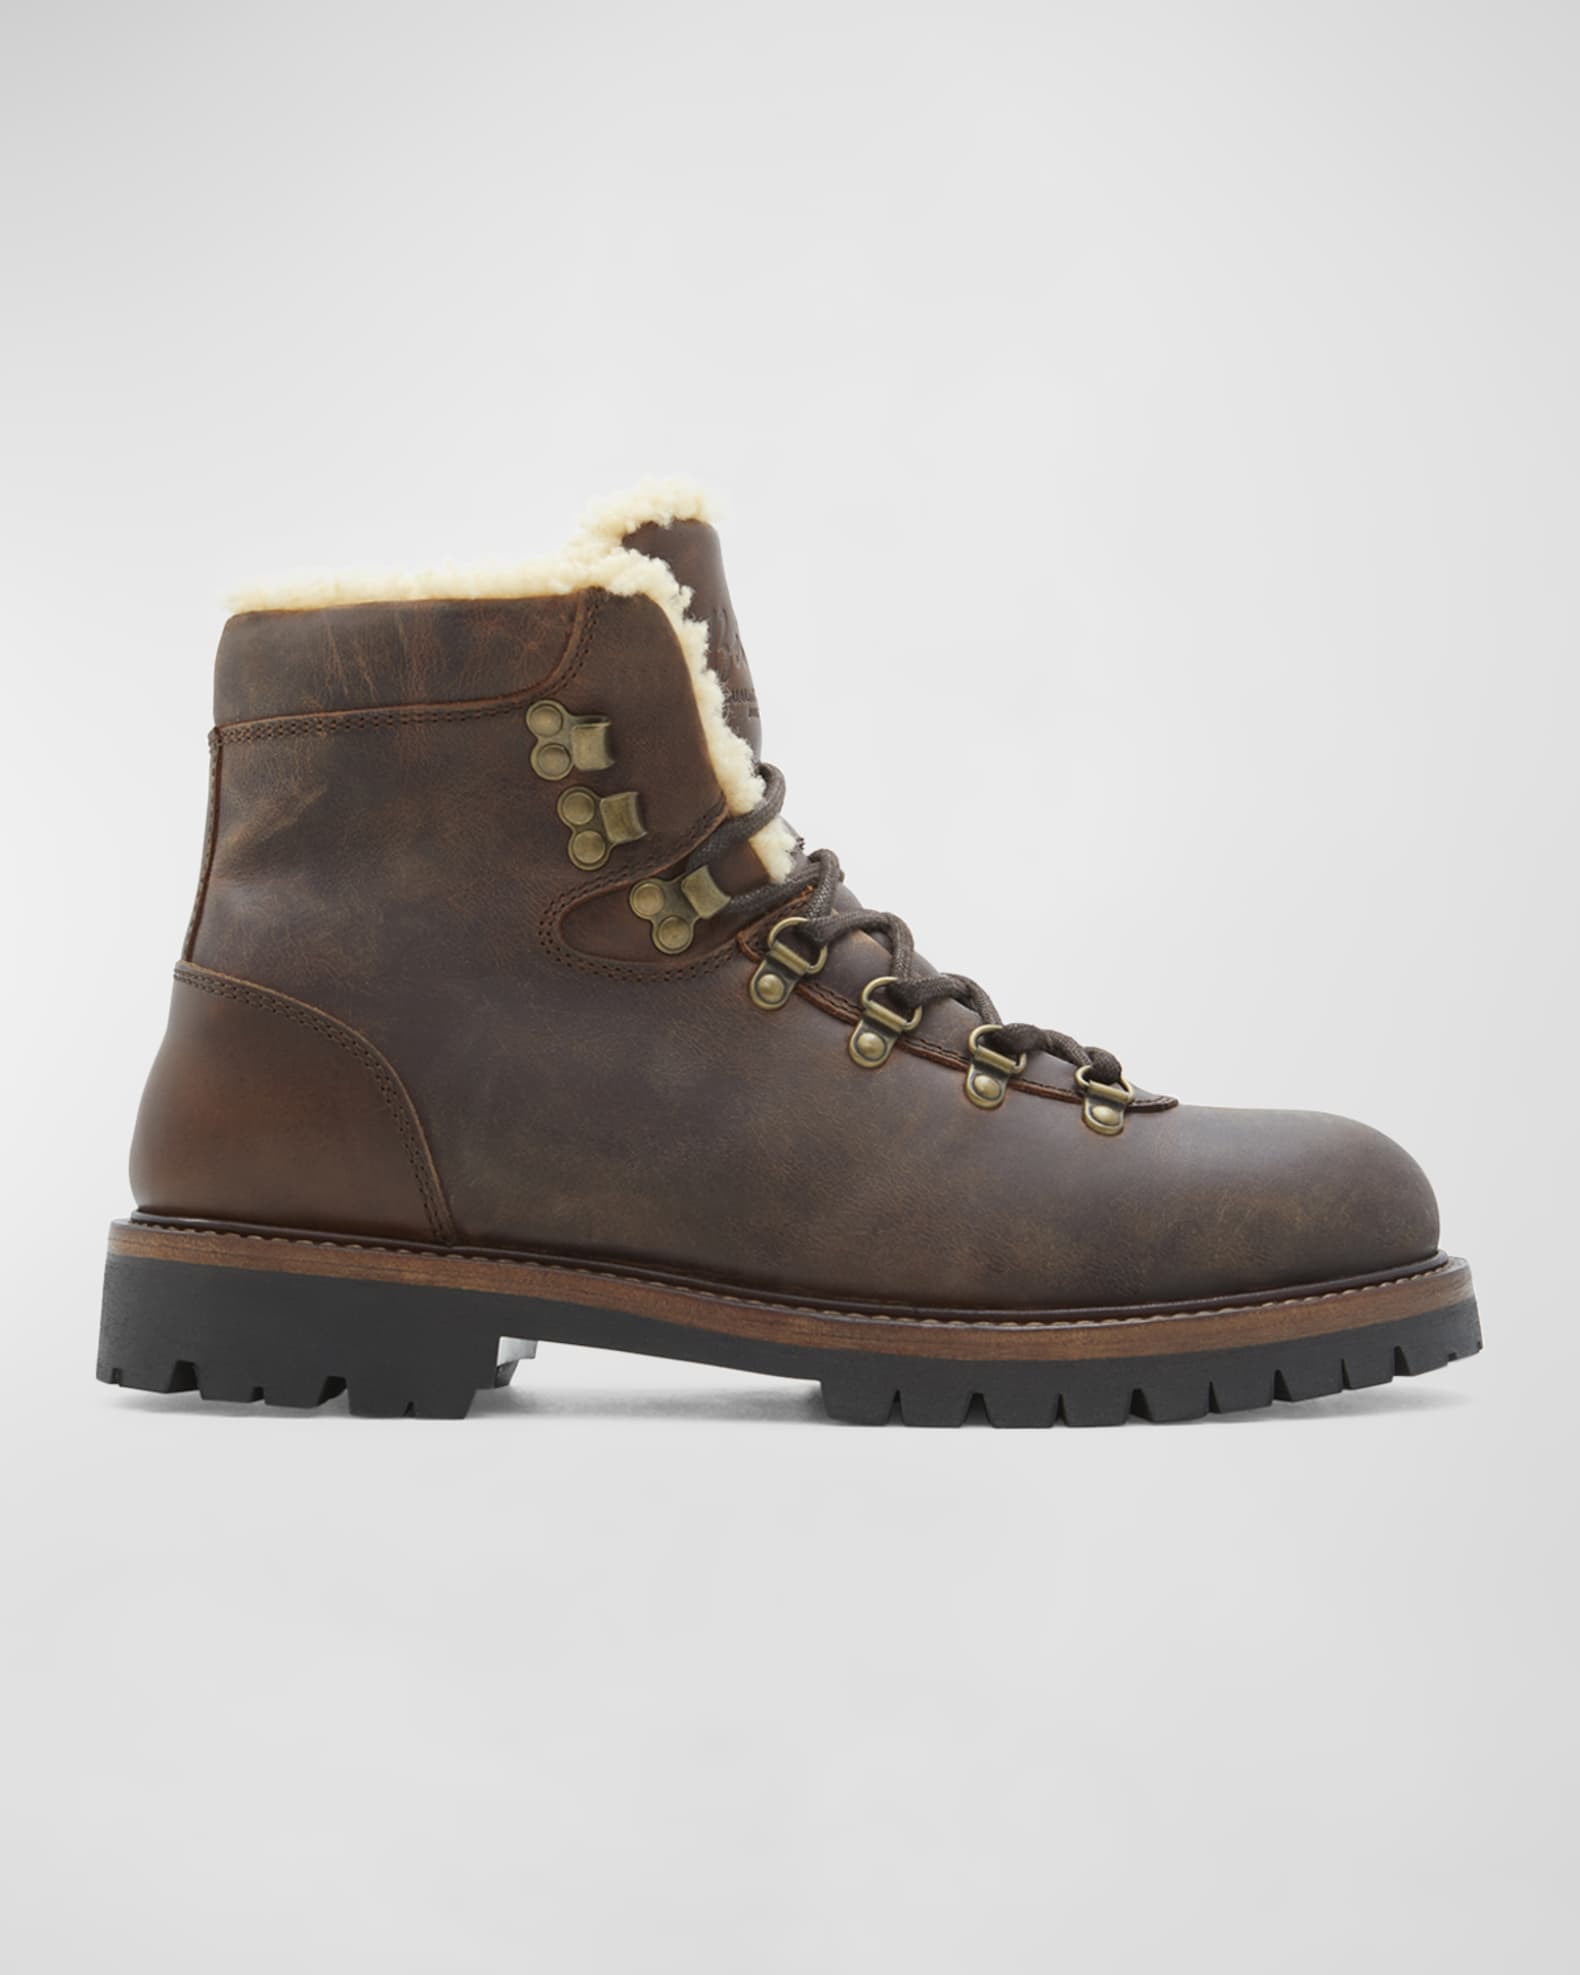 Belstaff Men's Gorge Shearling-Lined Leather Hiking Boots | Neiman Marcus